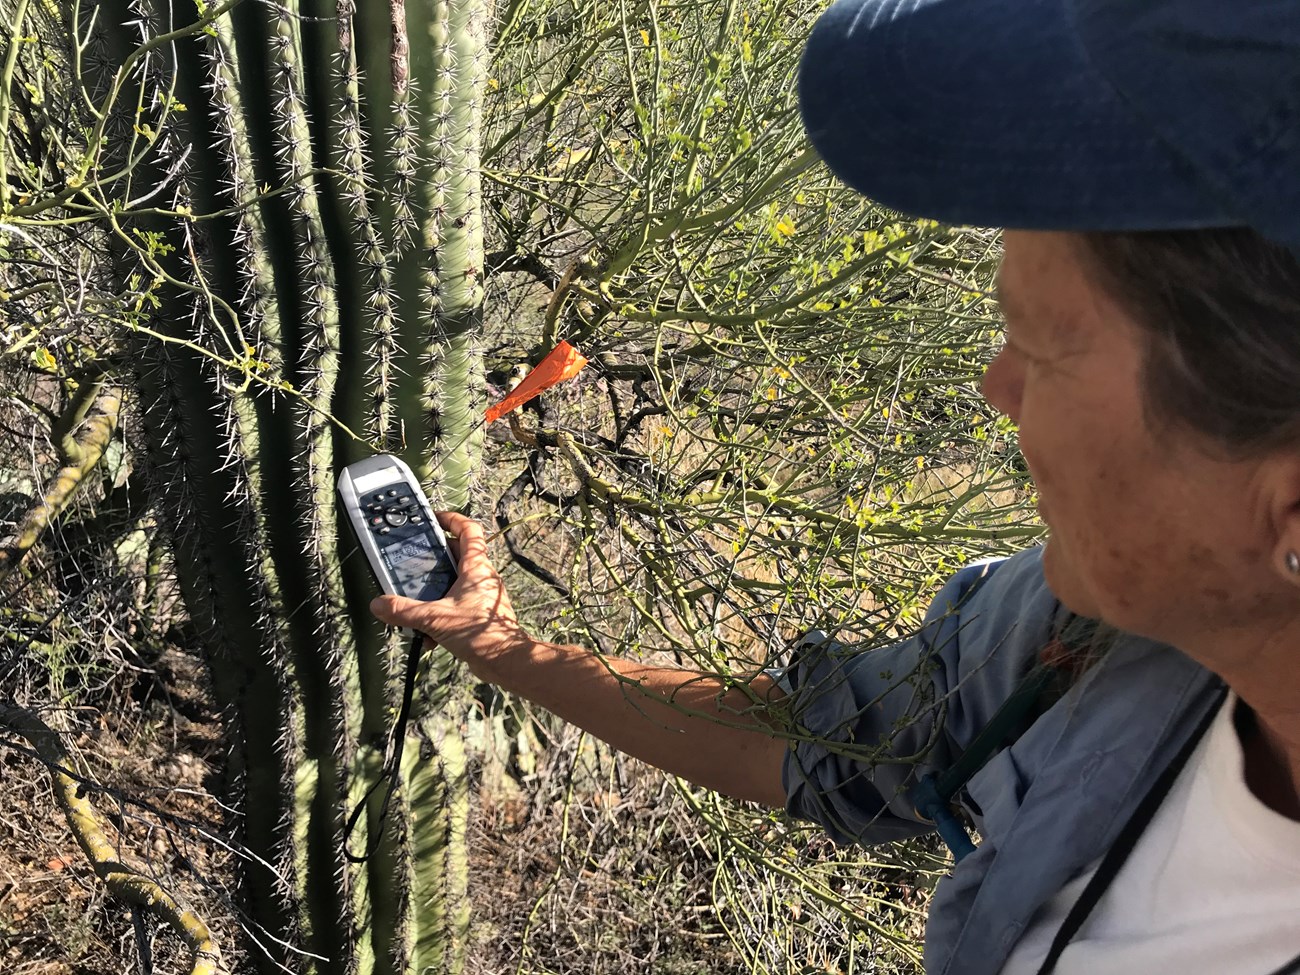 A volunteer using a device to find the coordinates of a saguaro